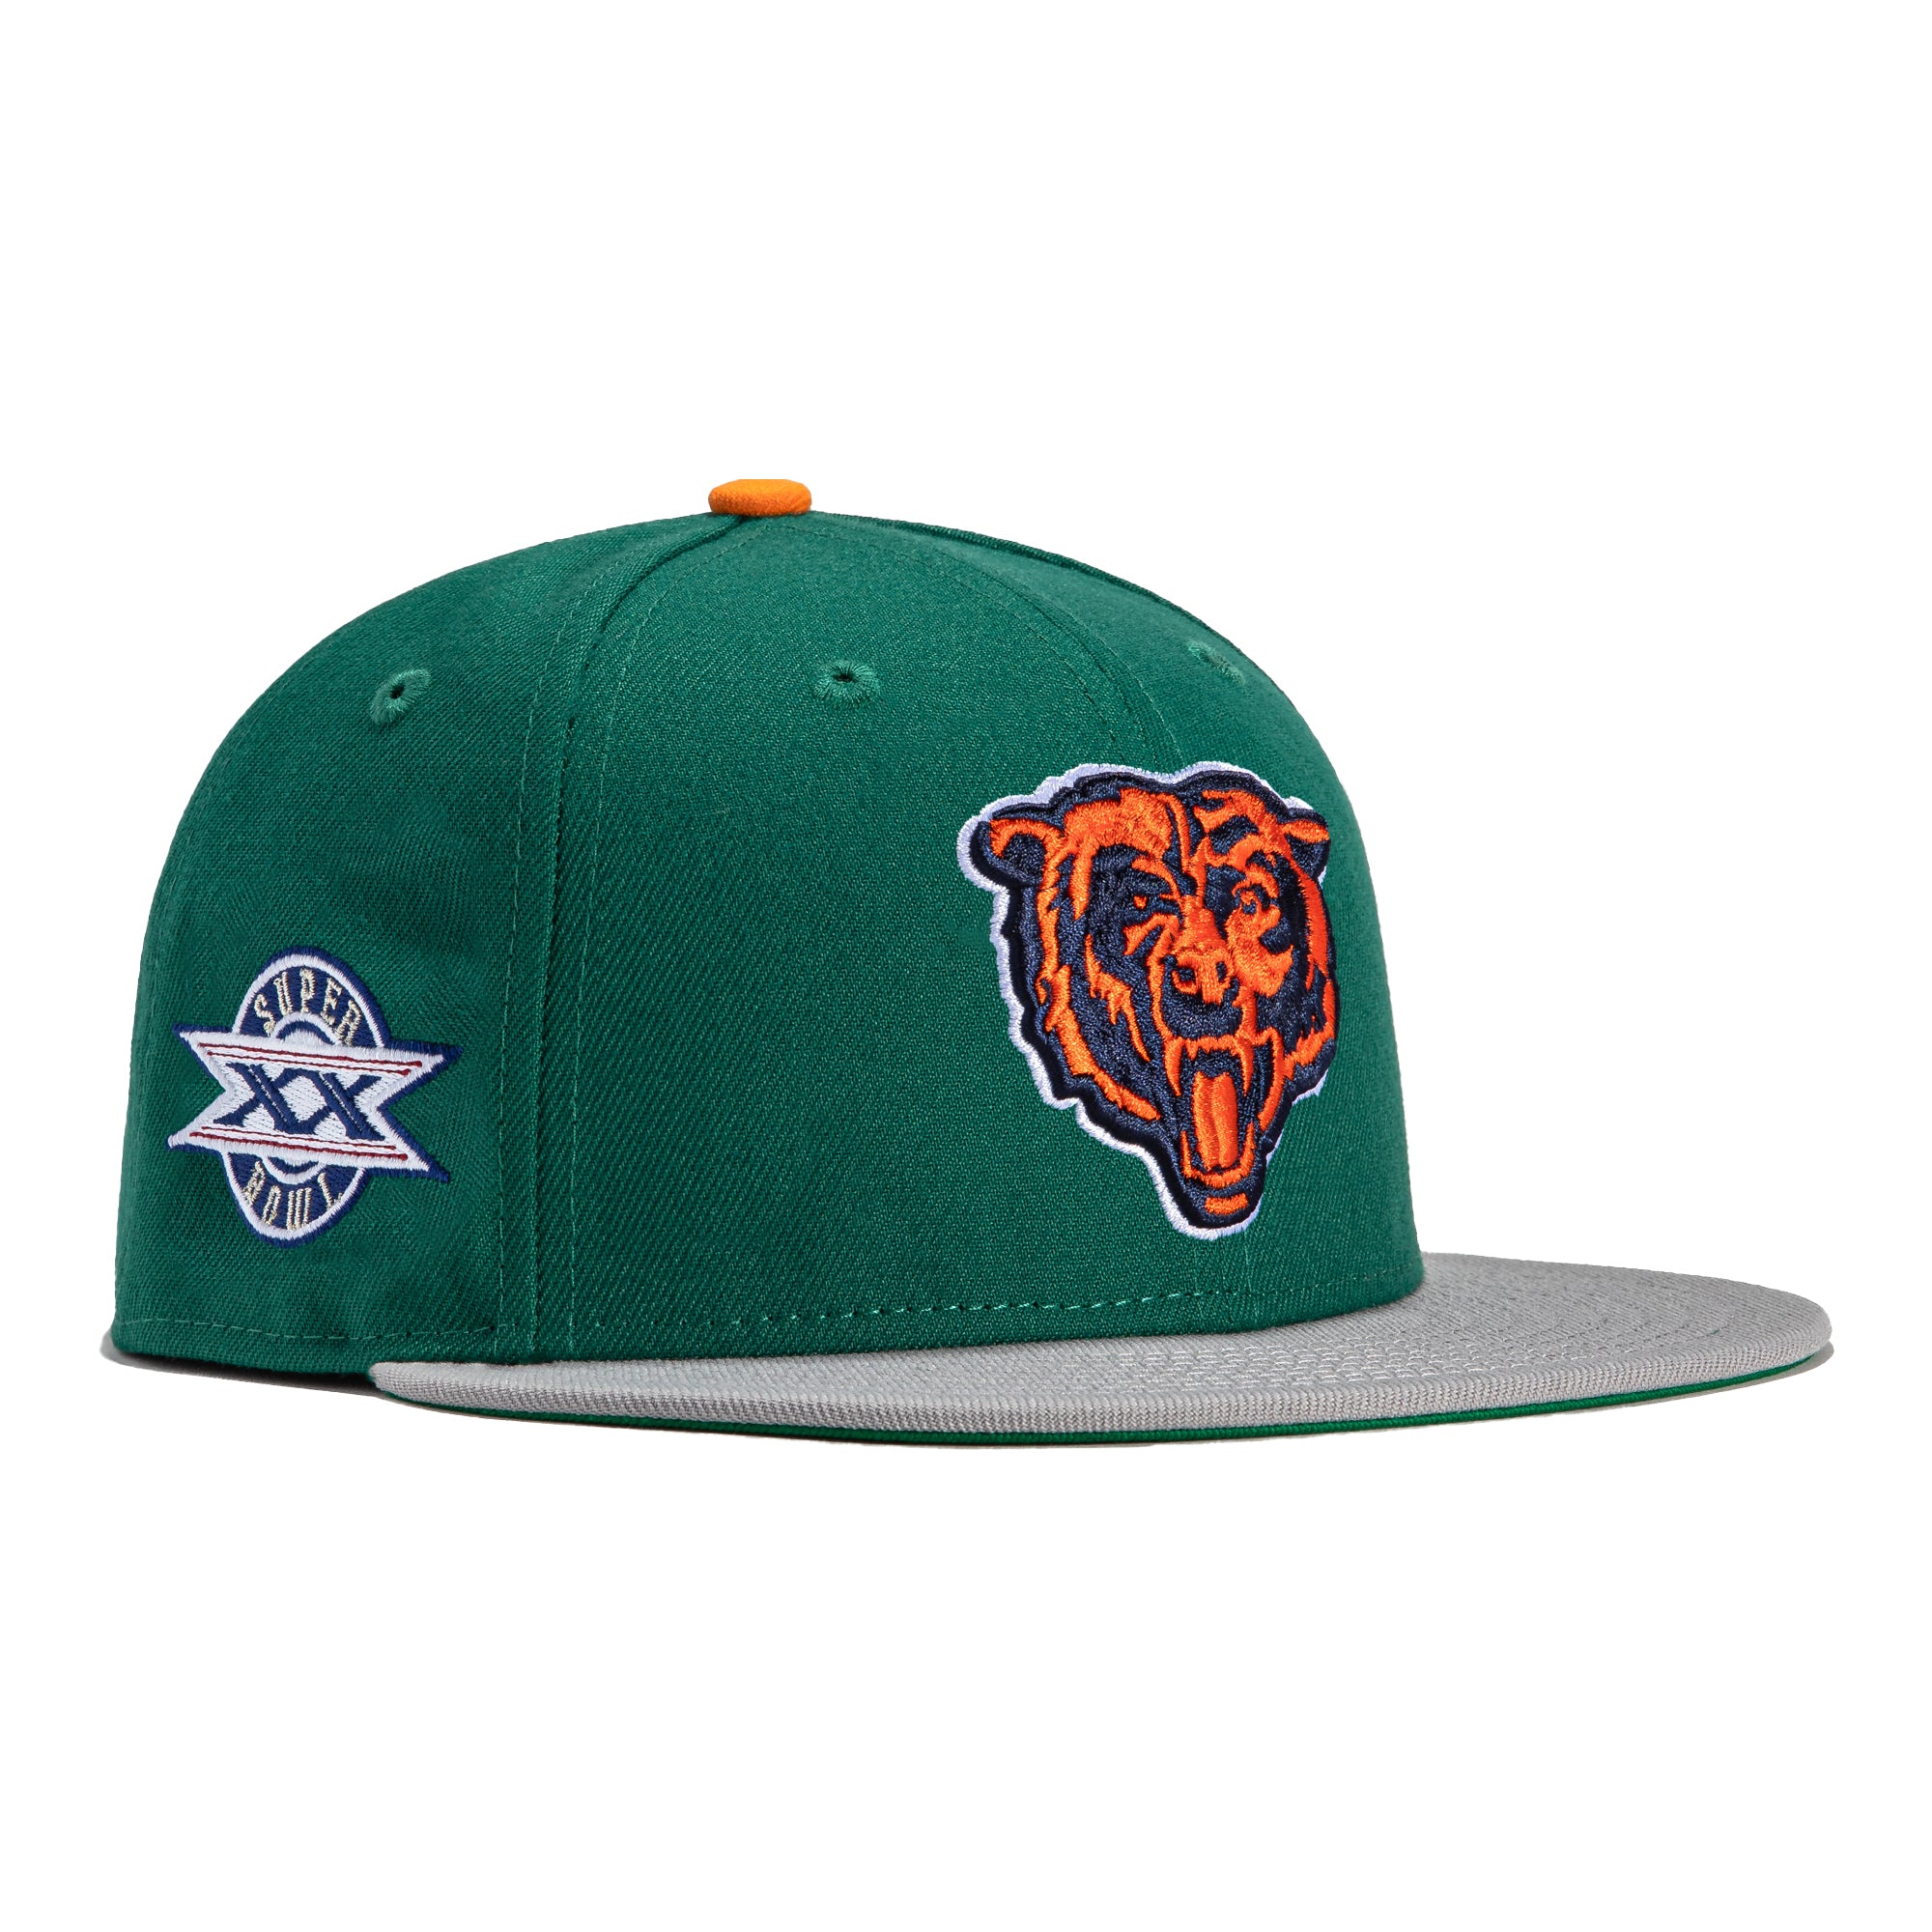 Chicago Bears Hats in Chicago Bears Team Shop 